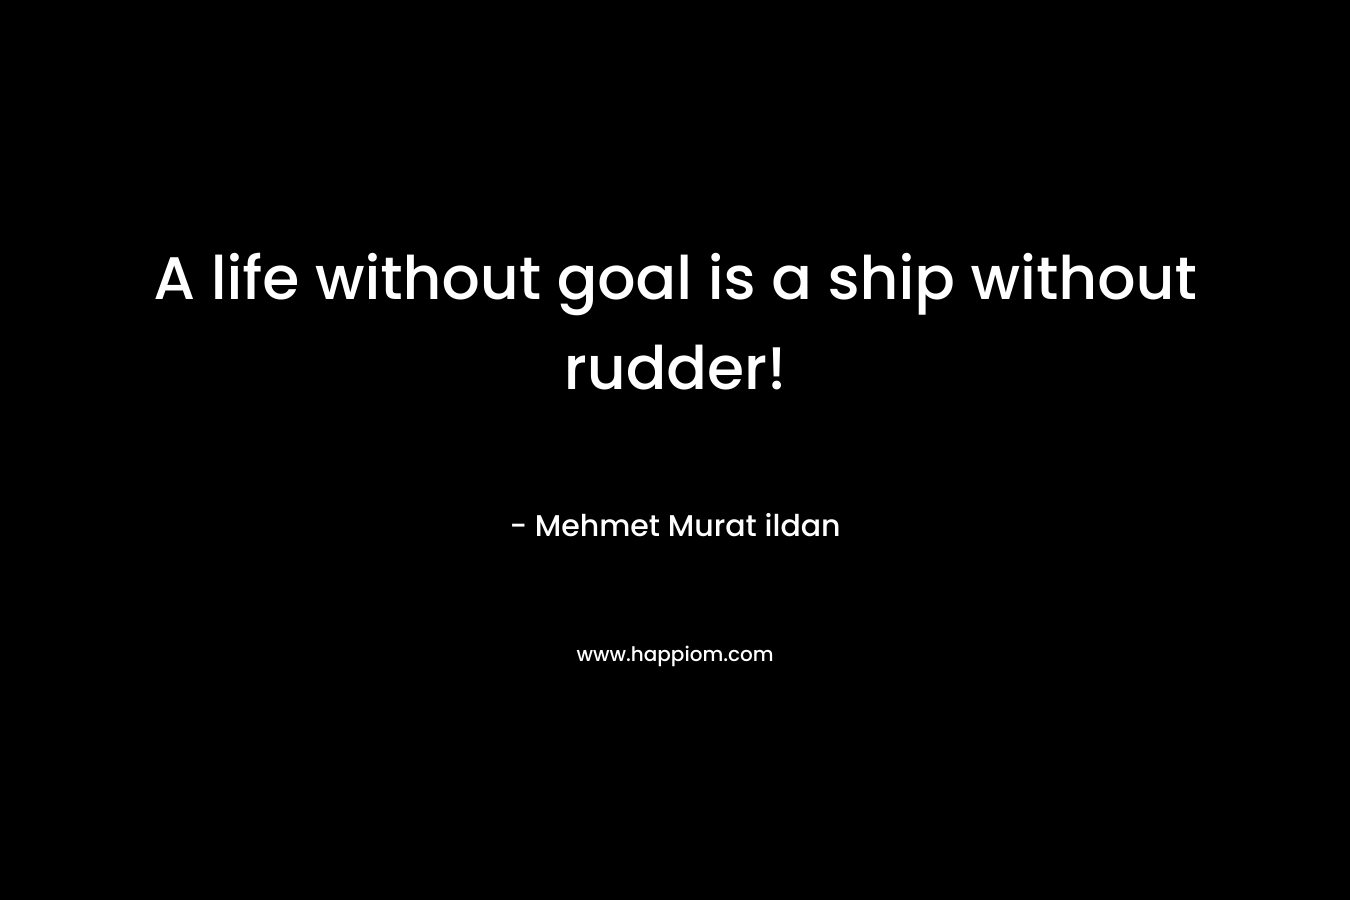 A life without goal is a ship without rudder! – Mehmet Murat ildan